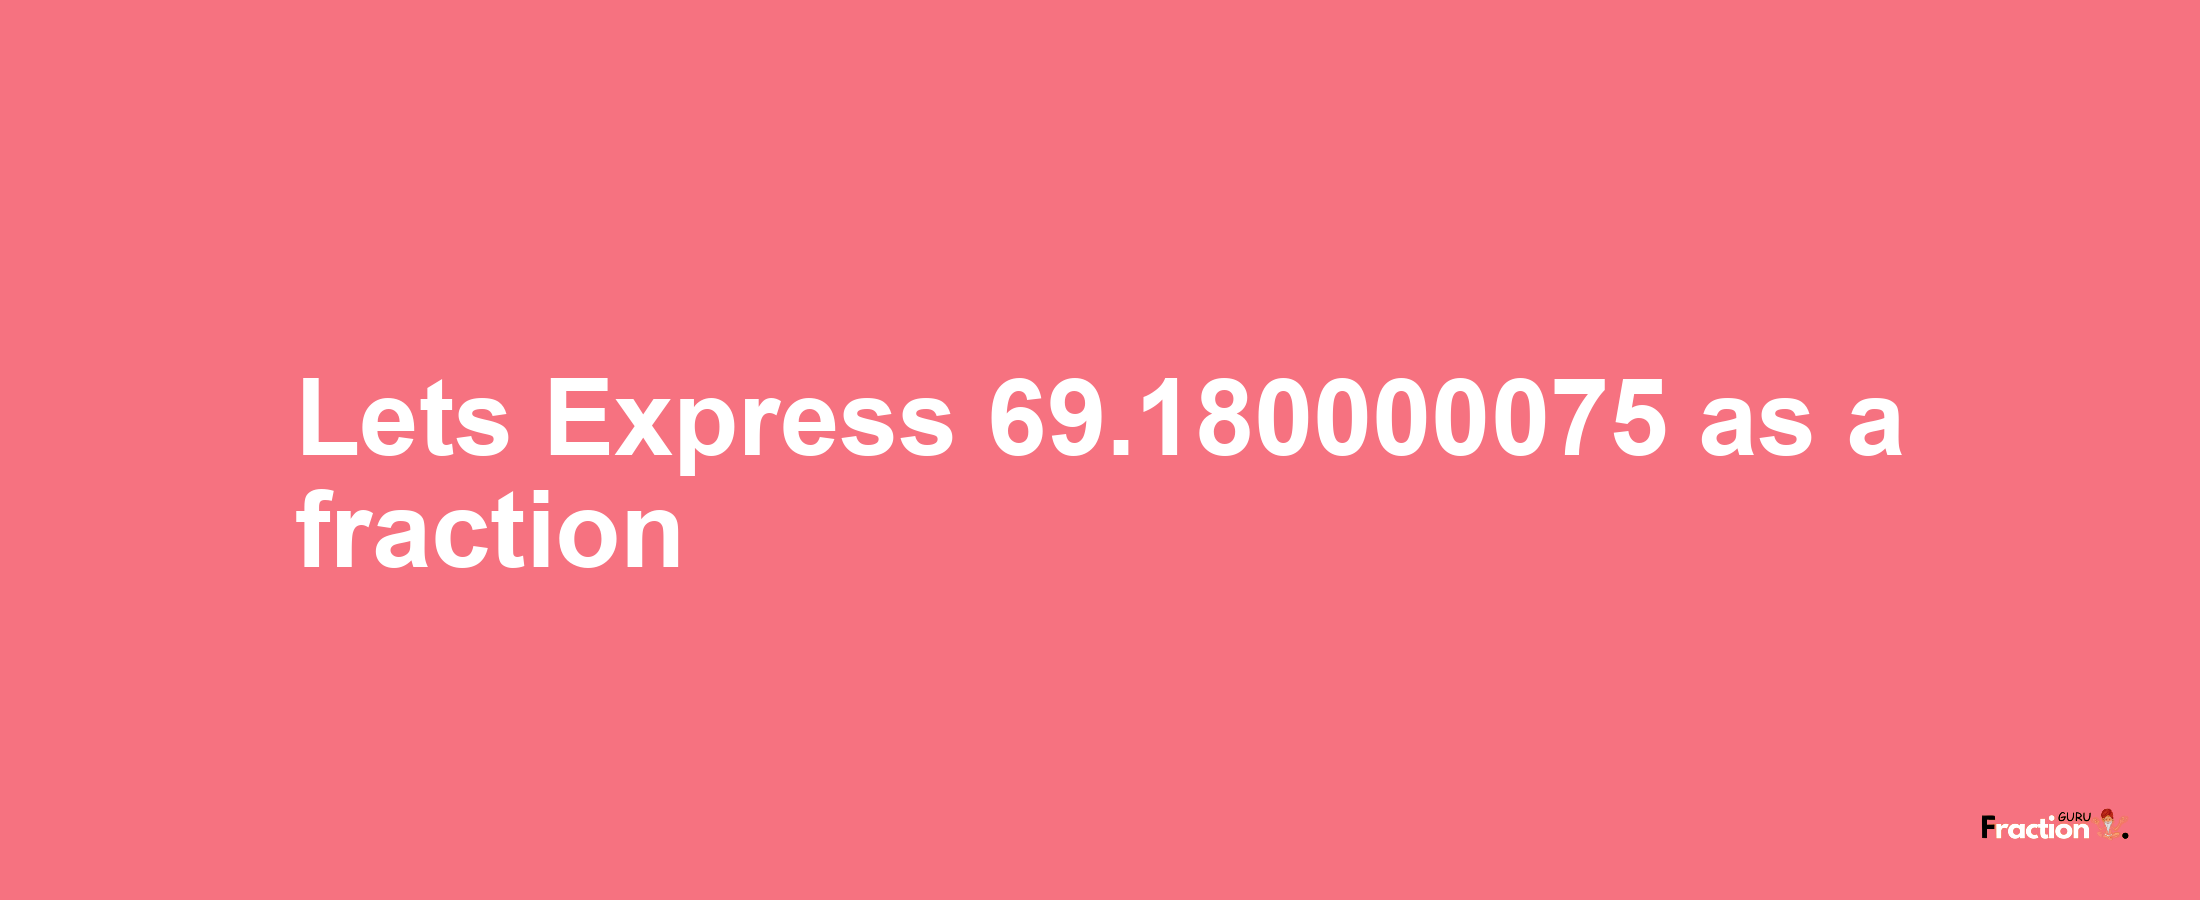 Lets Express 69.180000075 as afraction